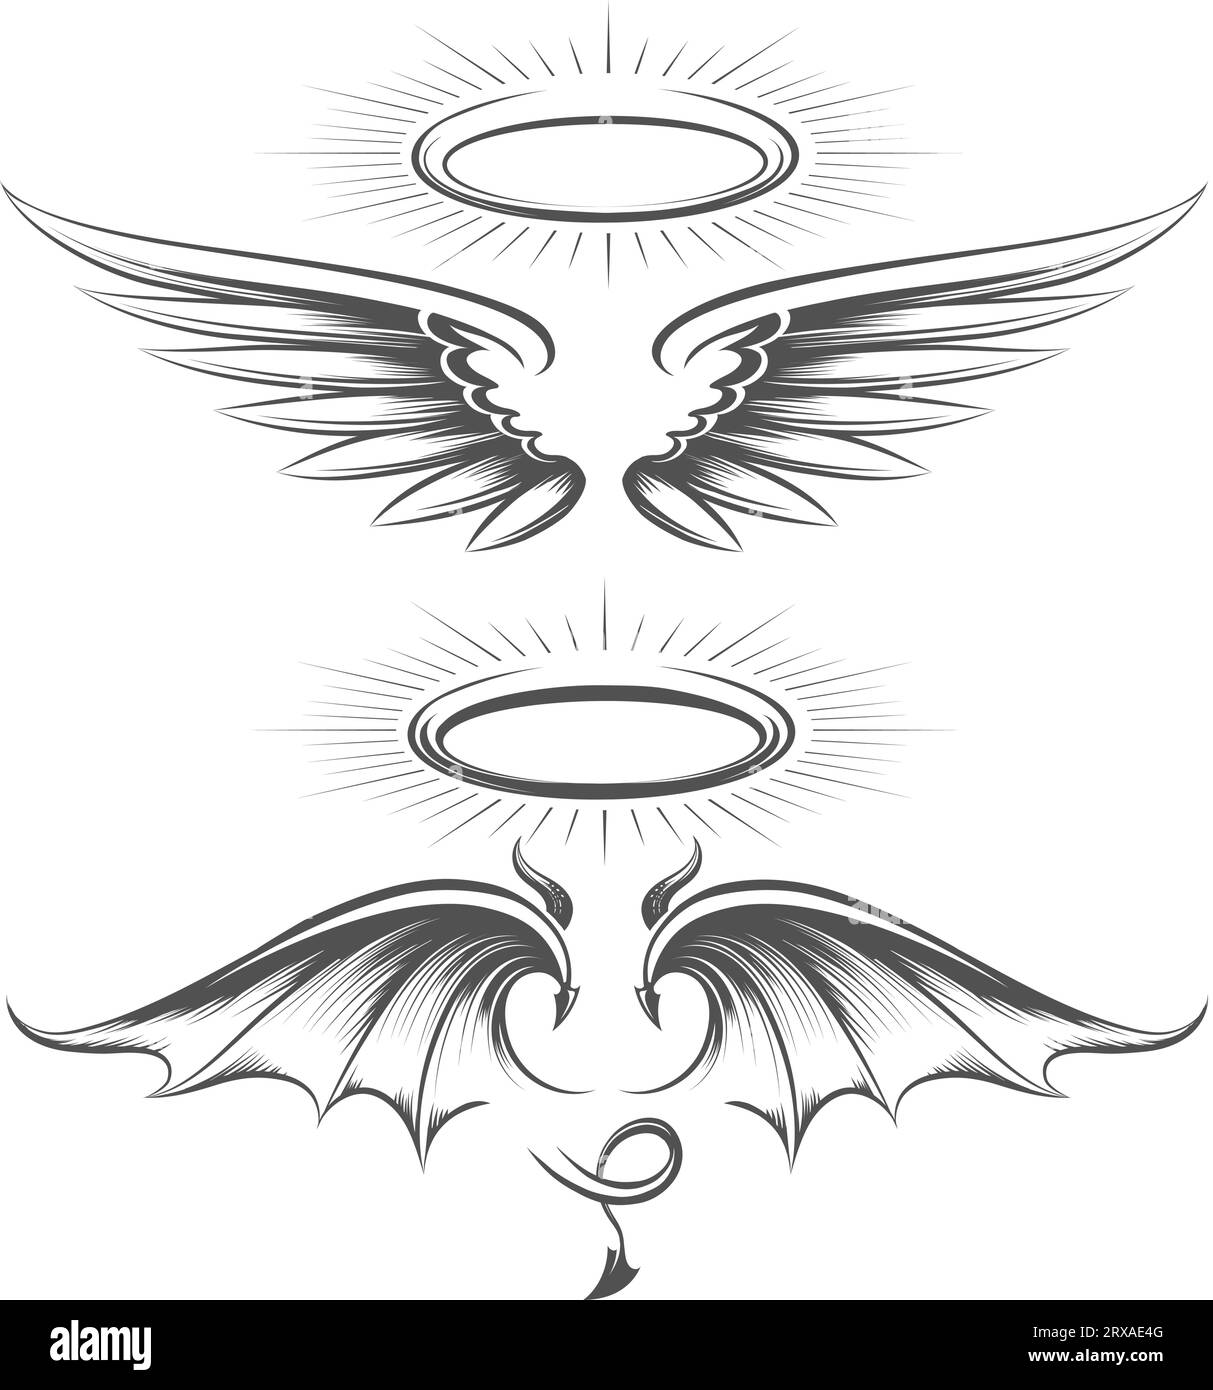 Angel devil wings and halo sketch Stock Vector